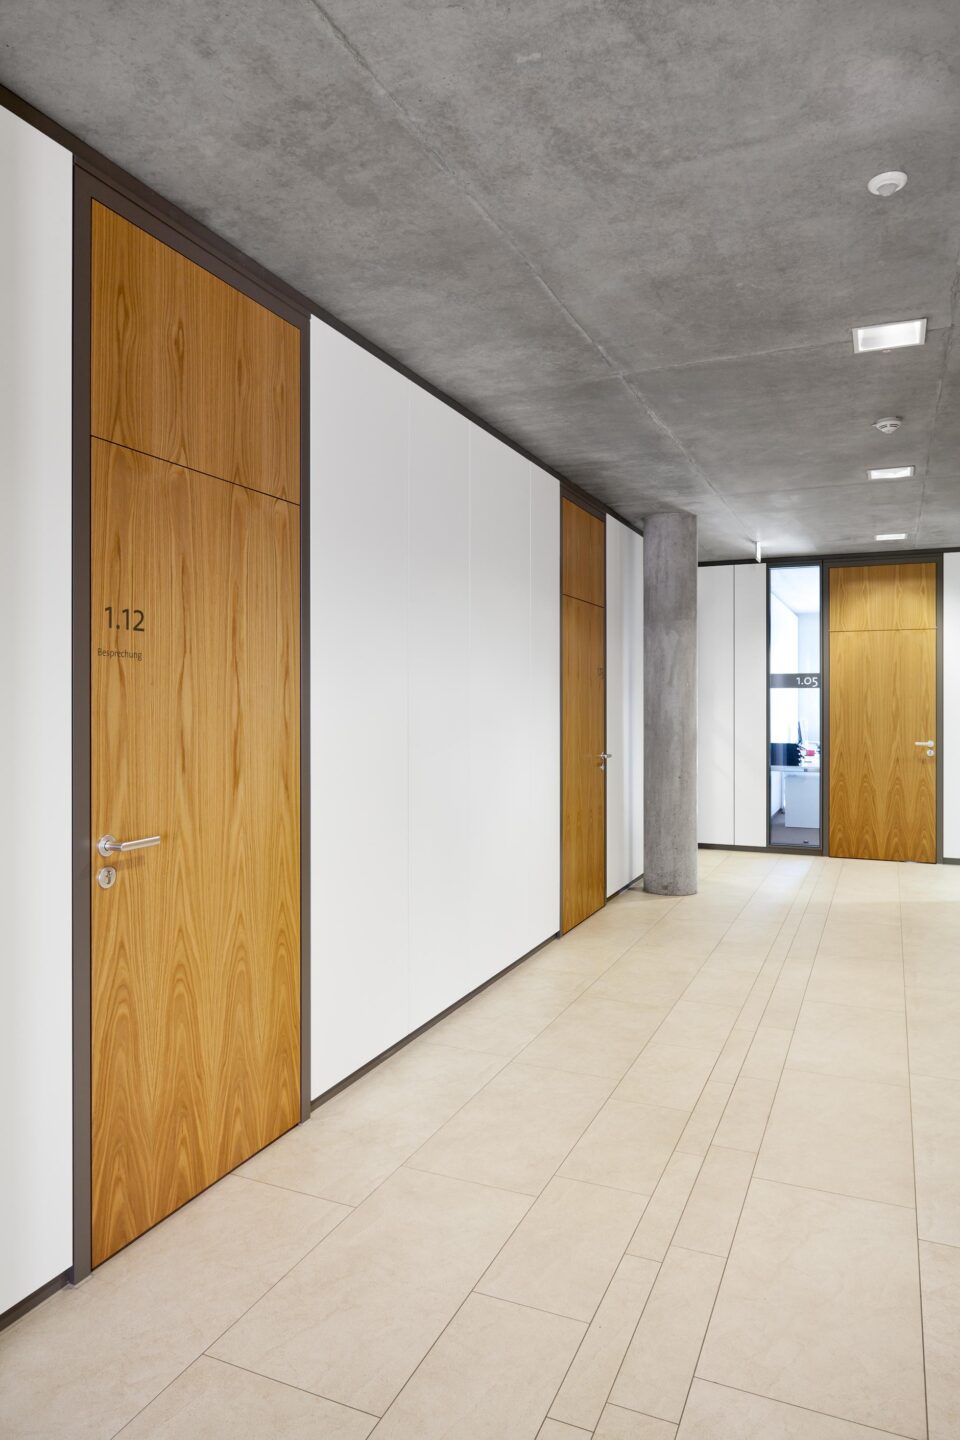 Town Hall Leingarten │ corridor and office partition │ fecotür wood